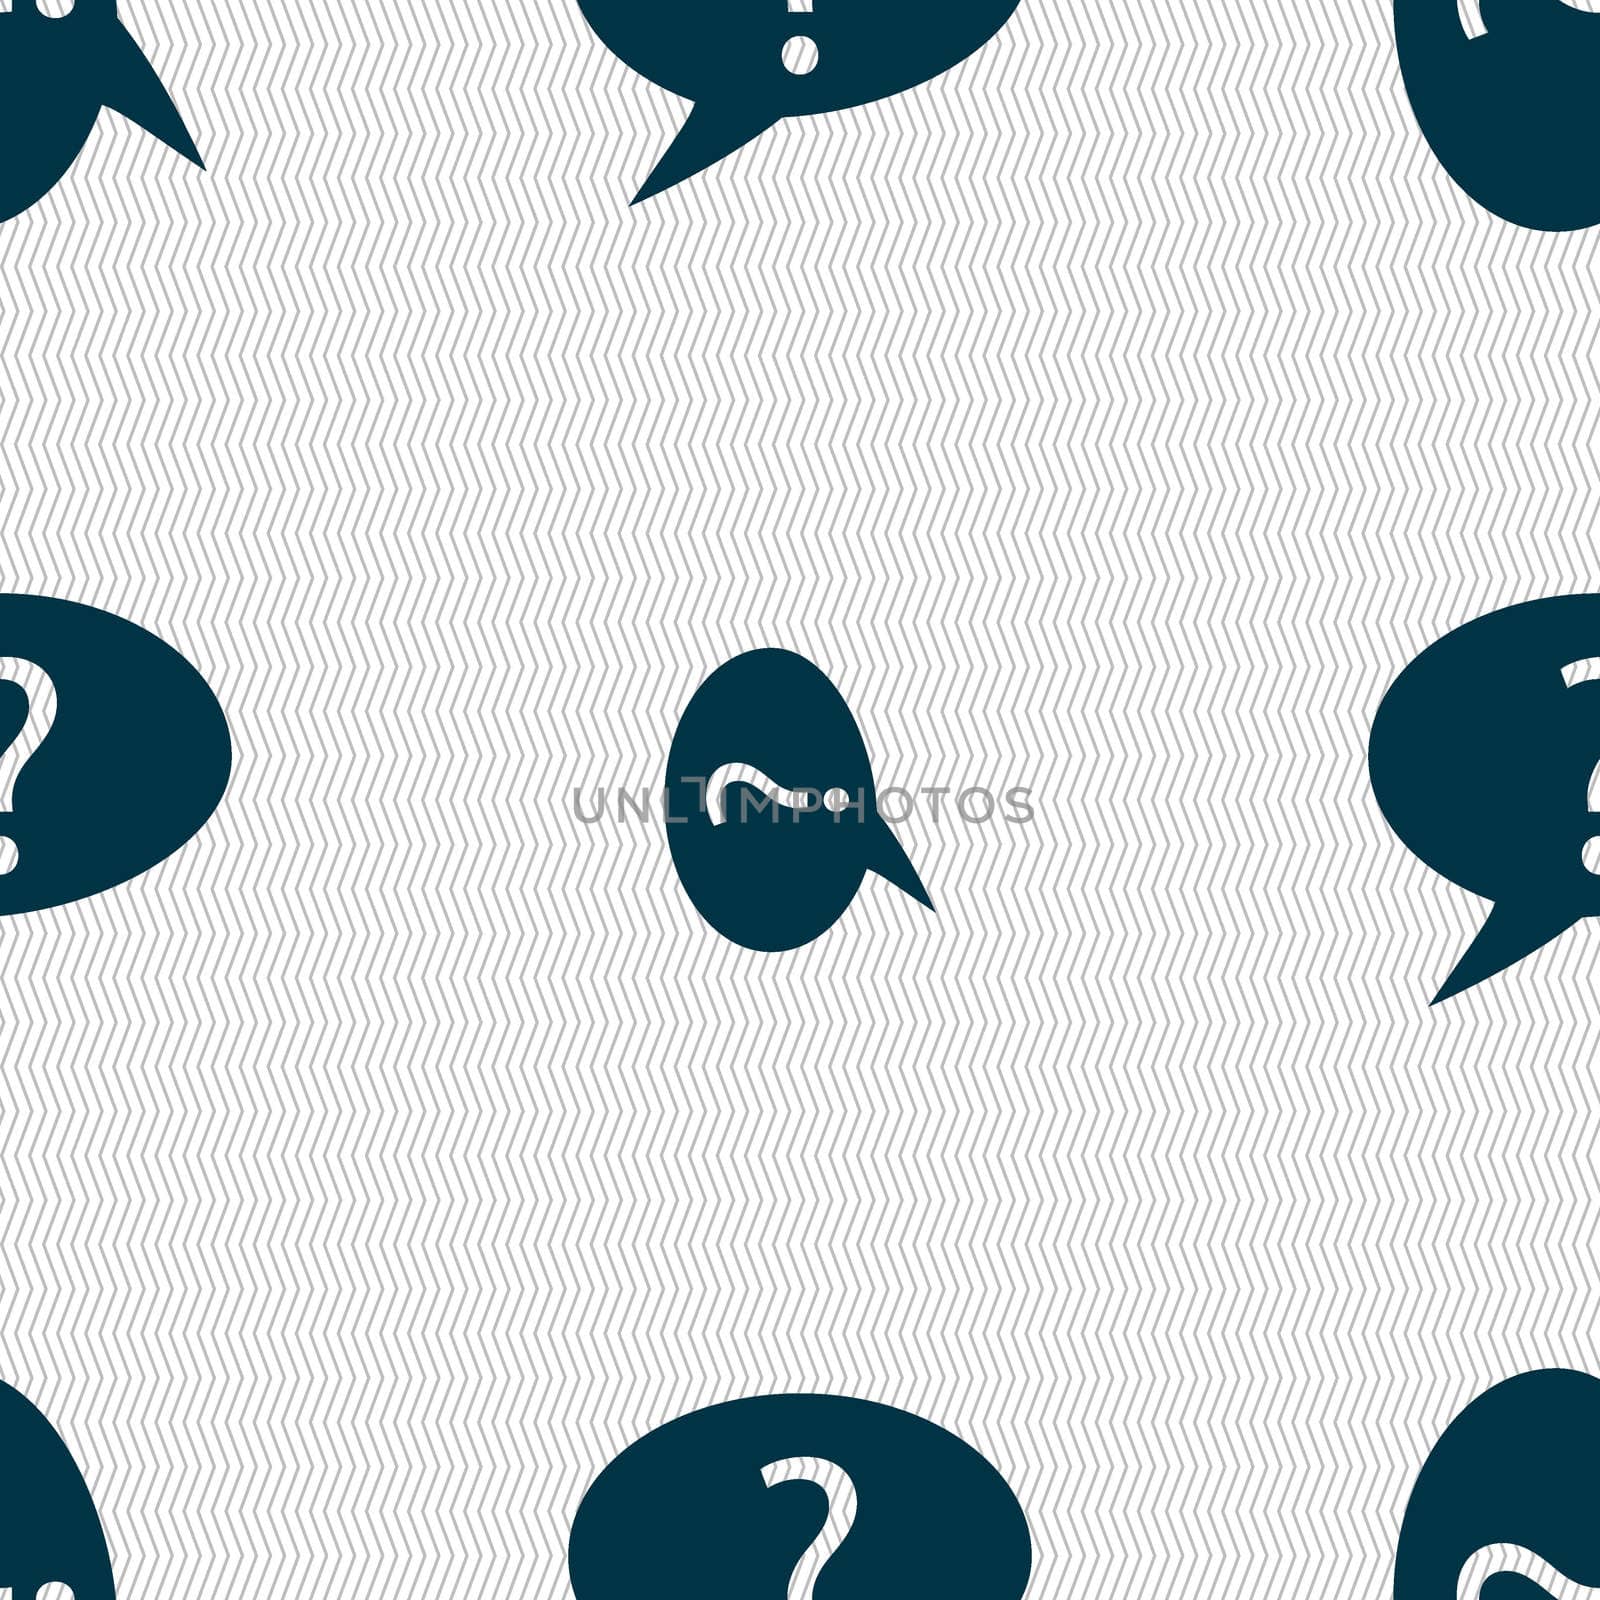 Question mark sign icon. Help speech bubble symbol. FAQ sign. Seamless abstract background with geometric shapes. illustration